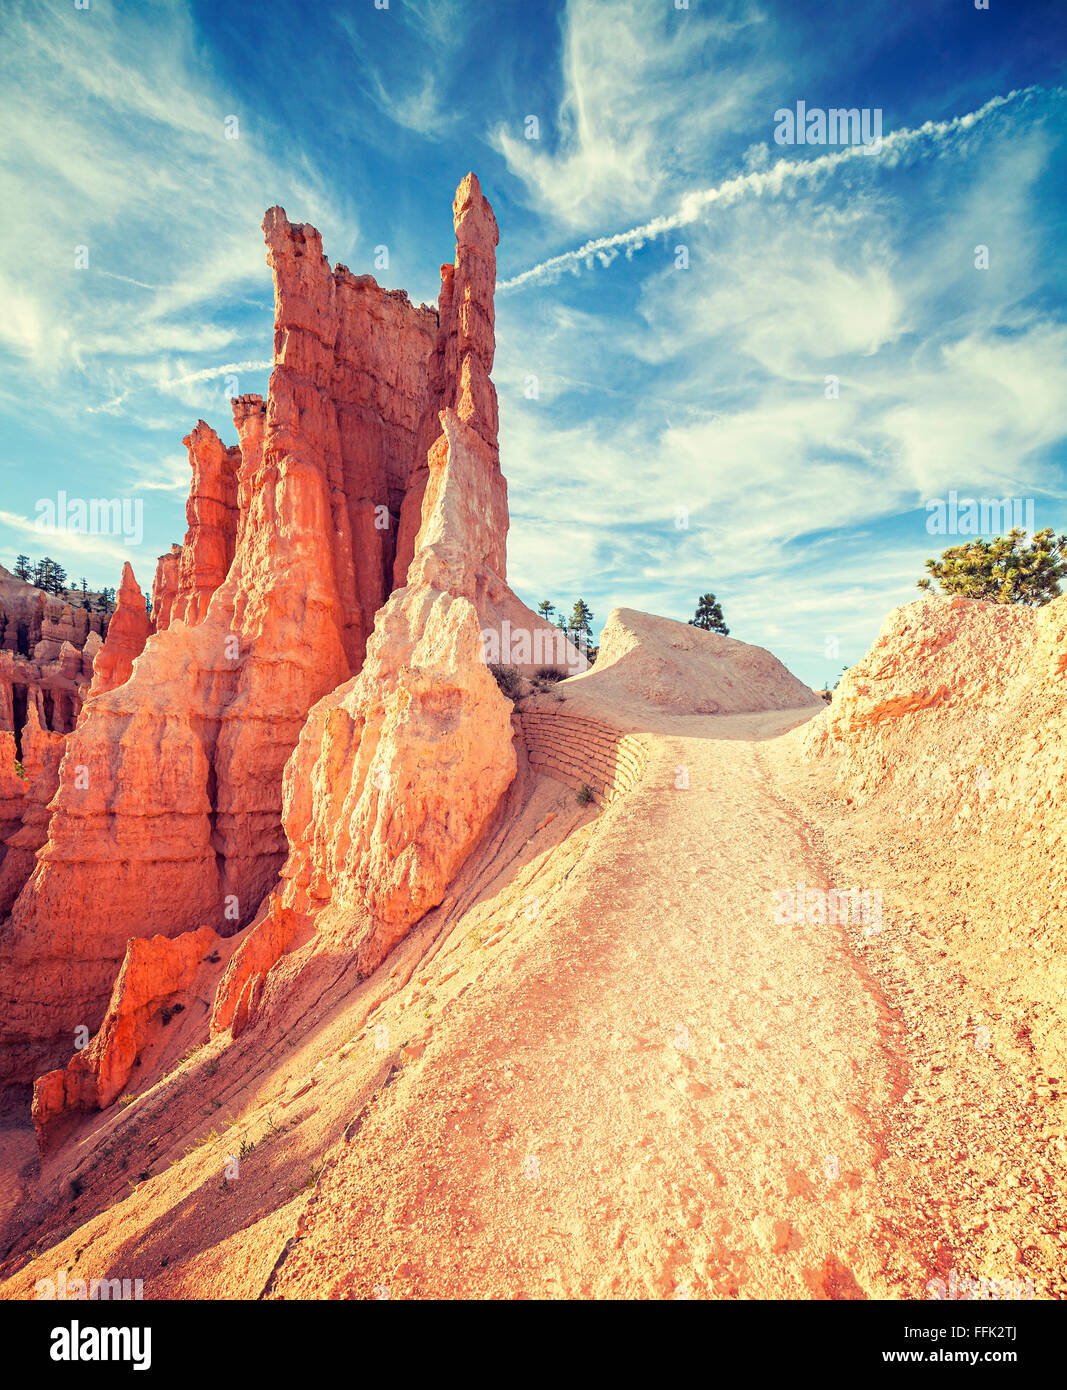 Vintage toned rock formations in Bryce Canyon National Park, Utah, USA. Stock Photo